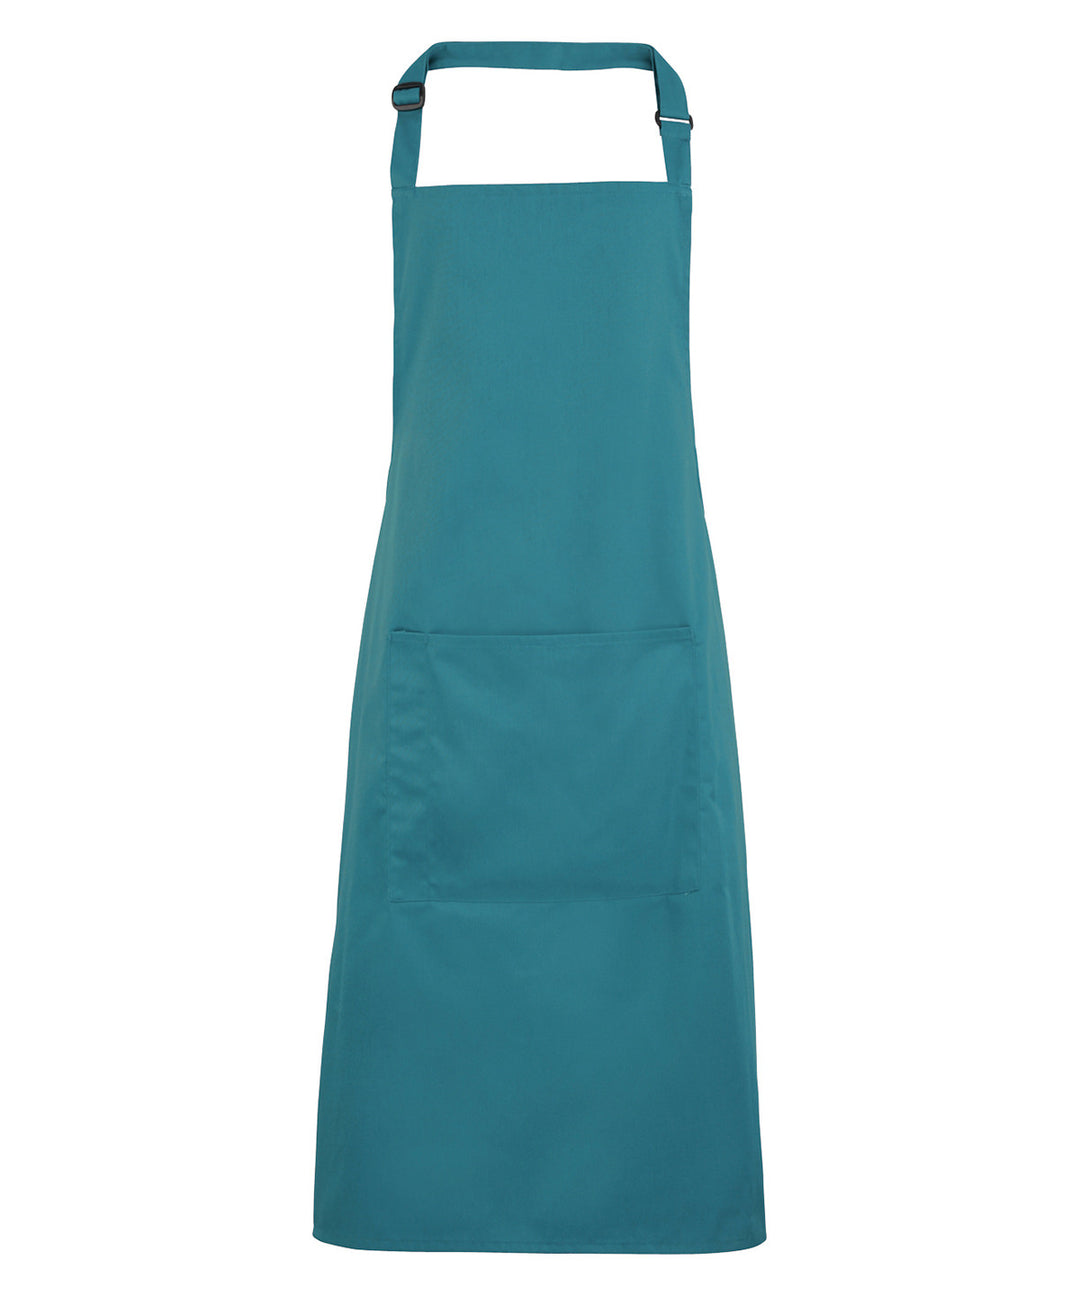 a teal colored apron with a white background